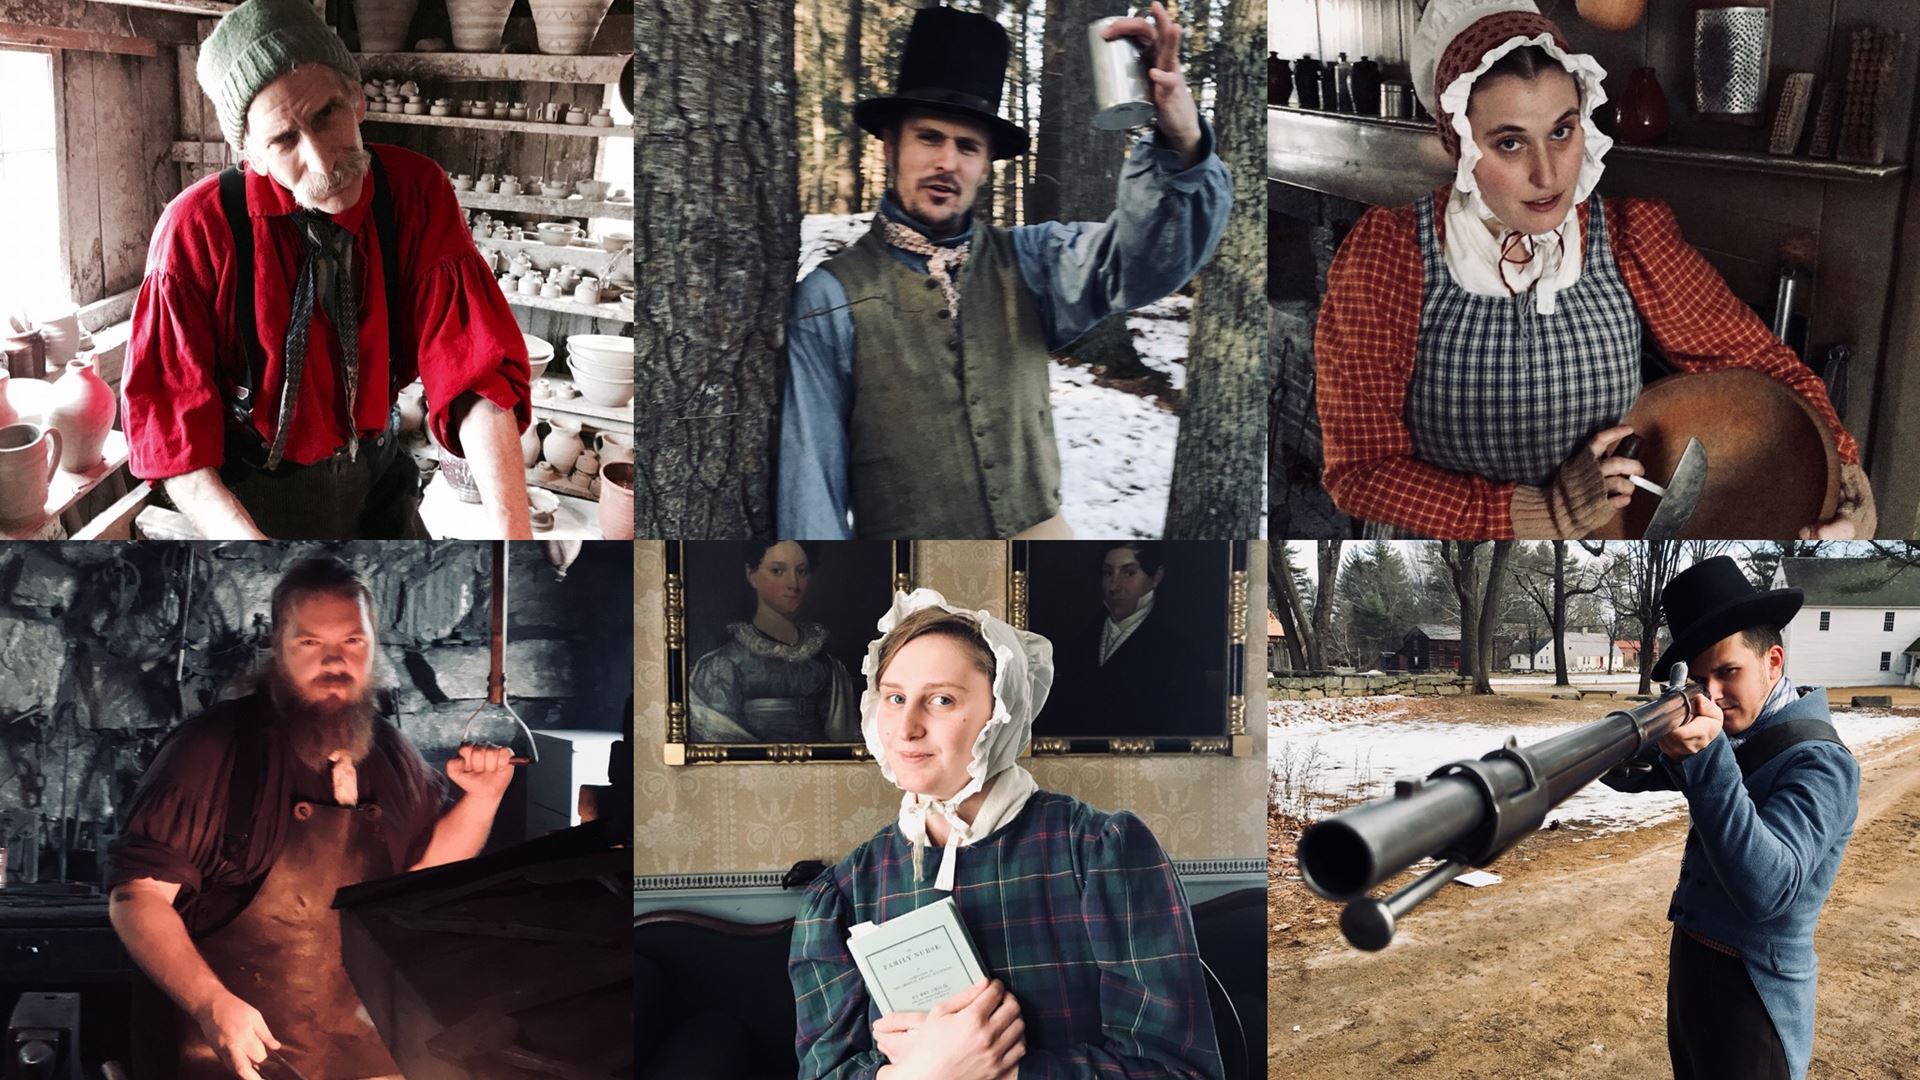 The Potter, the Peddler, the Farmer’s Daughter, the Blacksmith, the Printer’s Daughter, and the Hunter bring Old Surbridge Village to life in Midwinter Mischief.